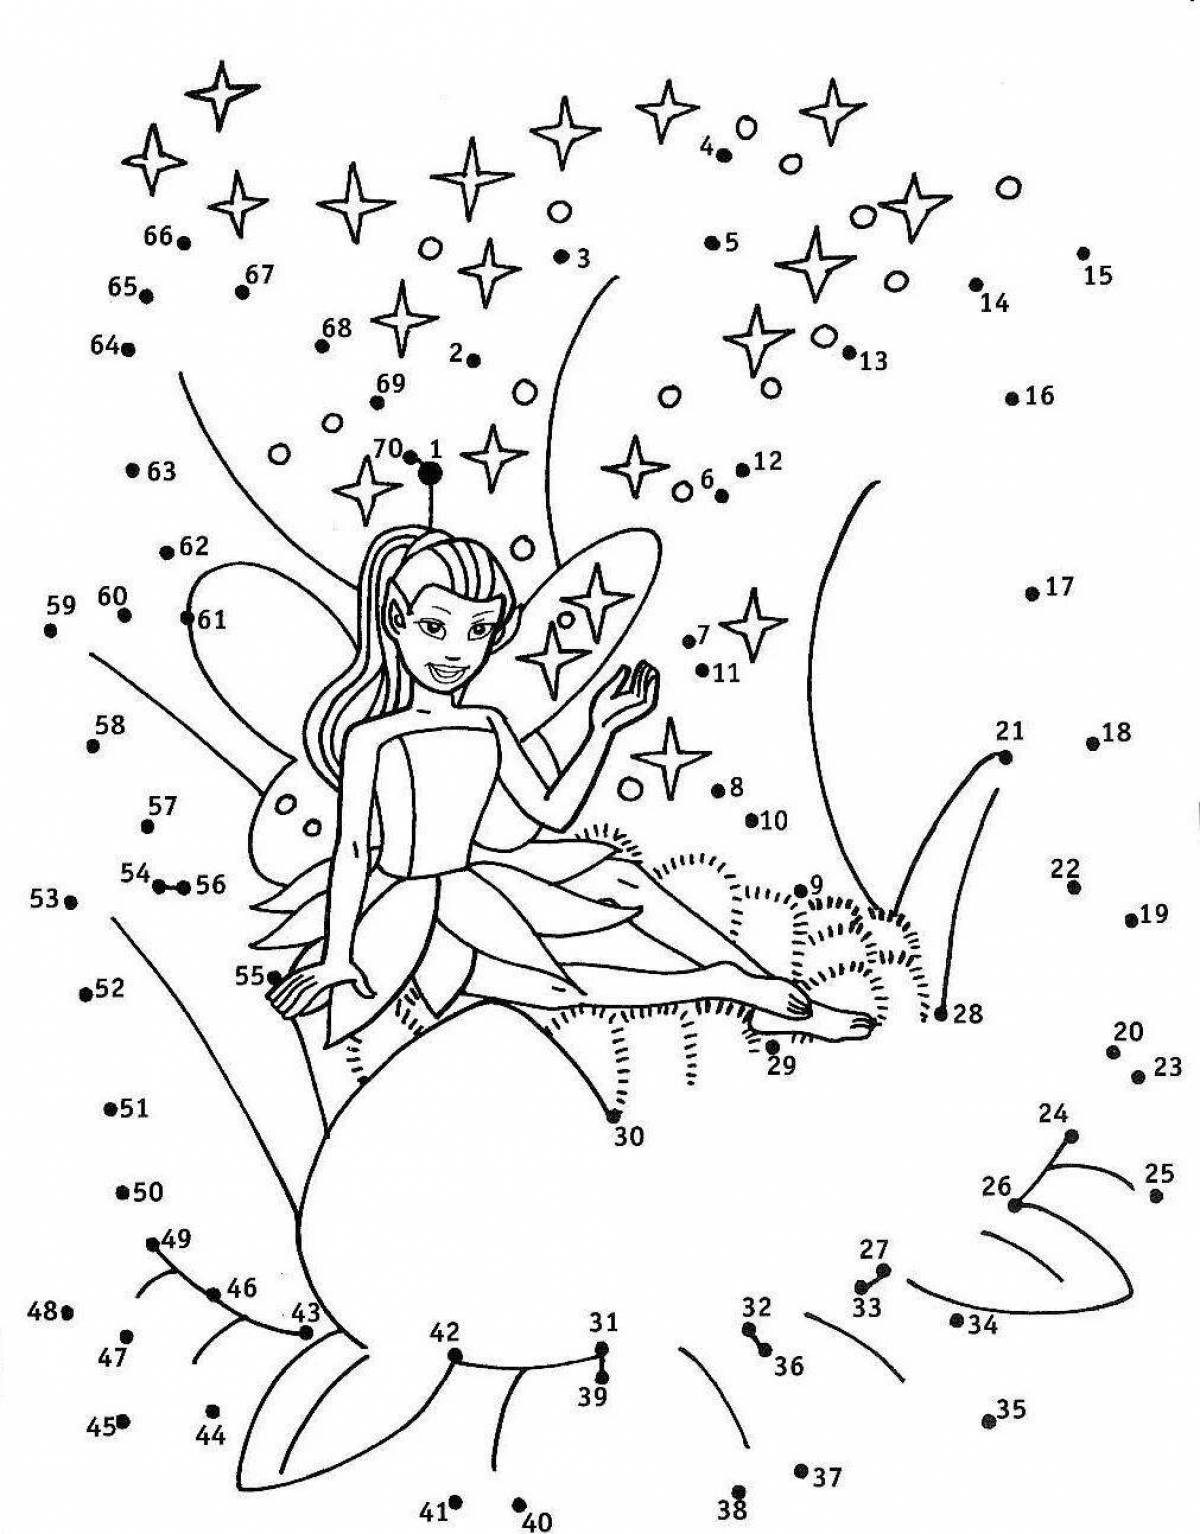 Amazing connect by numbers coloring page